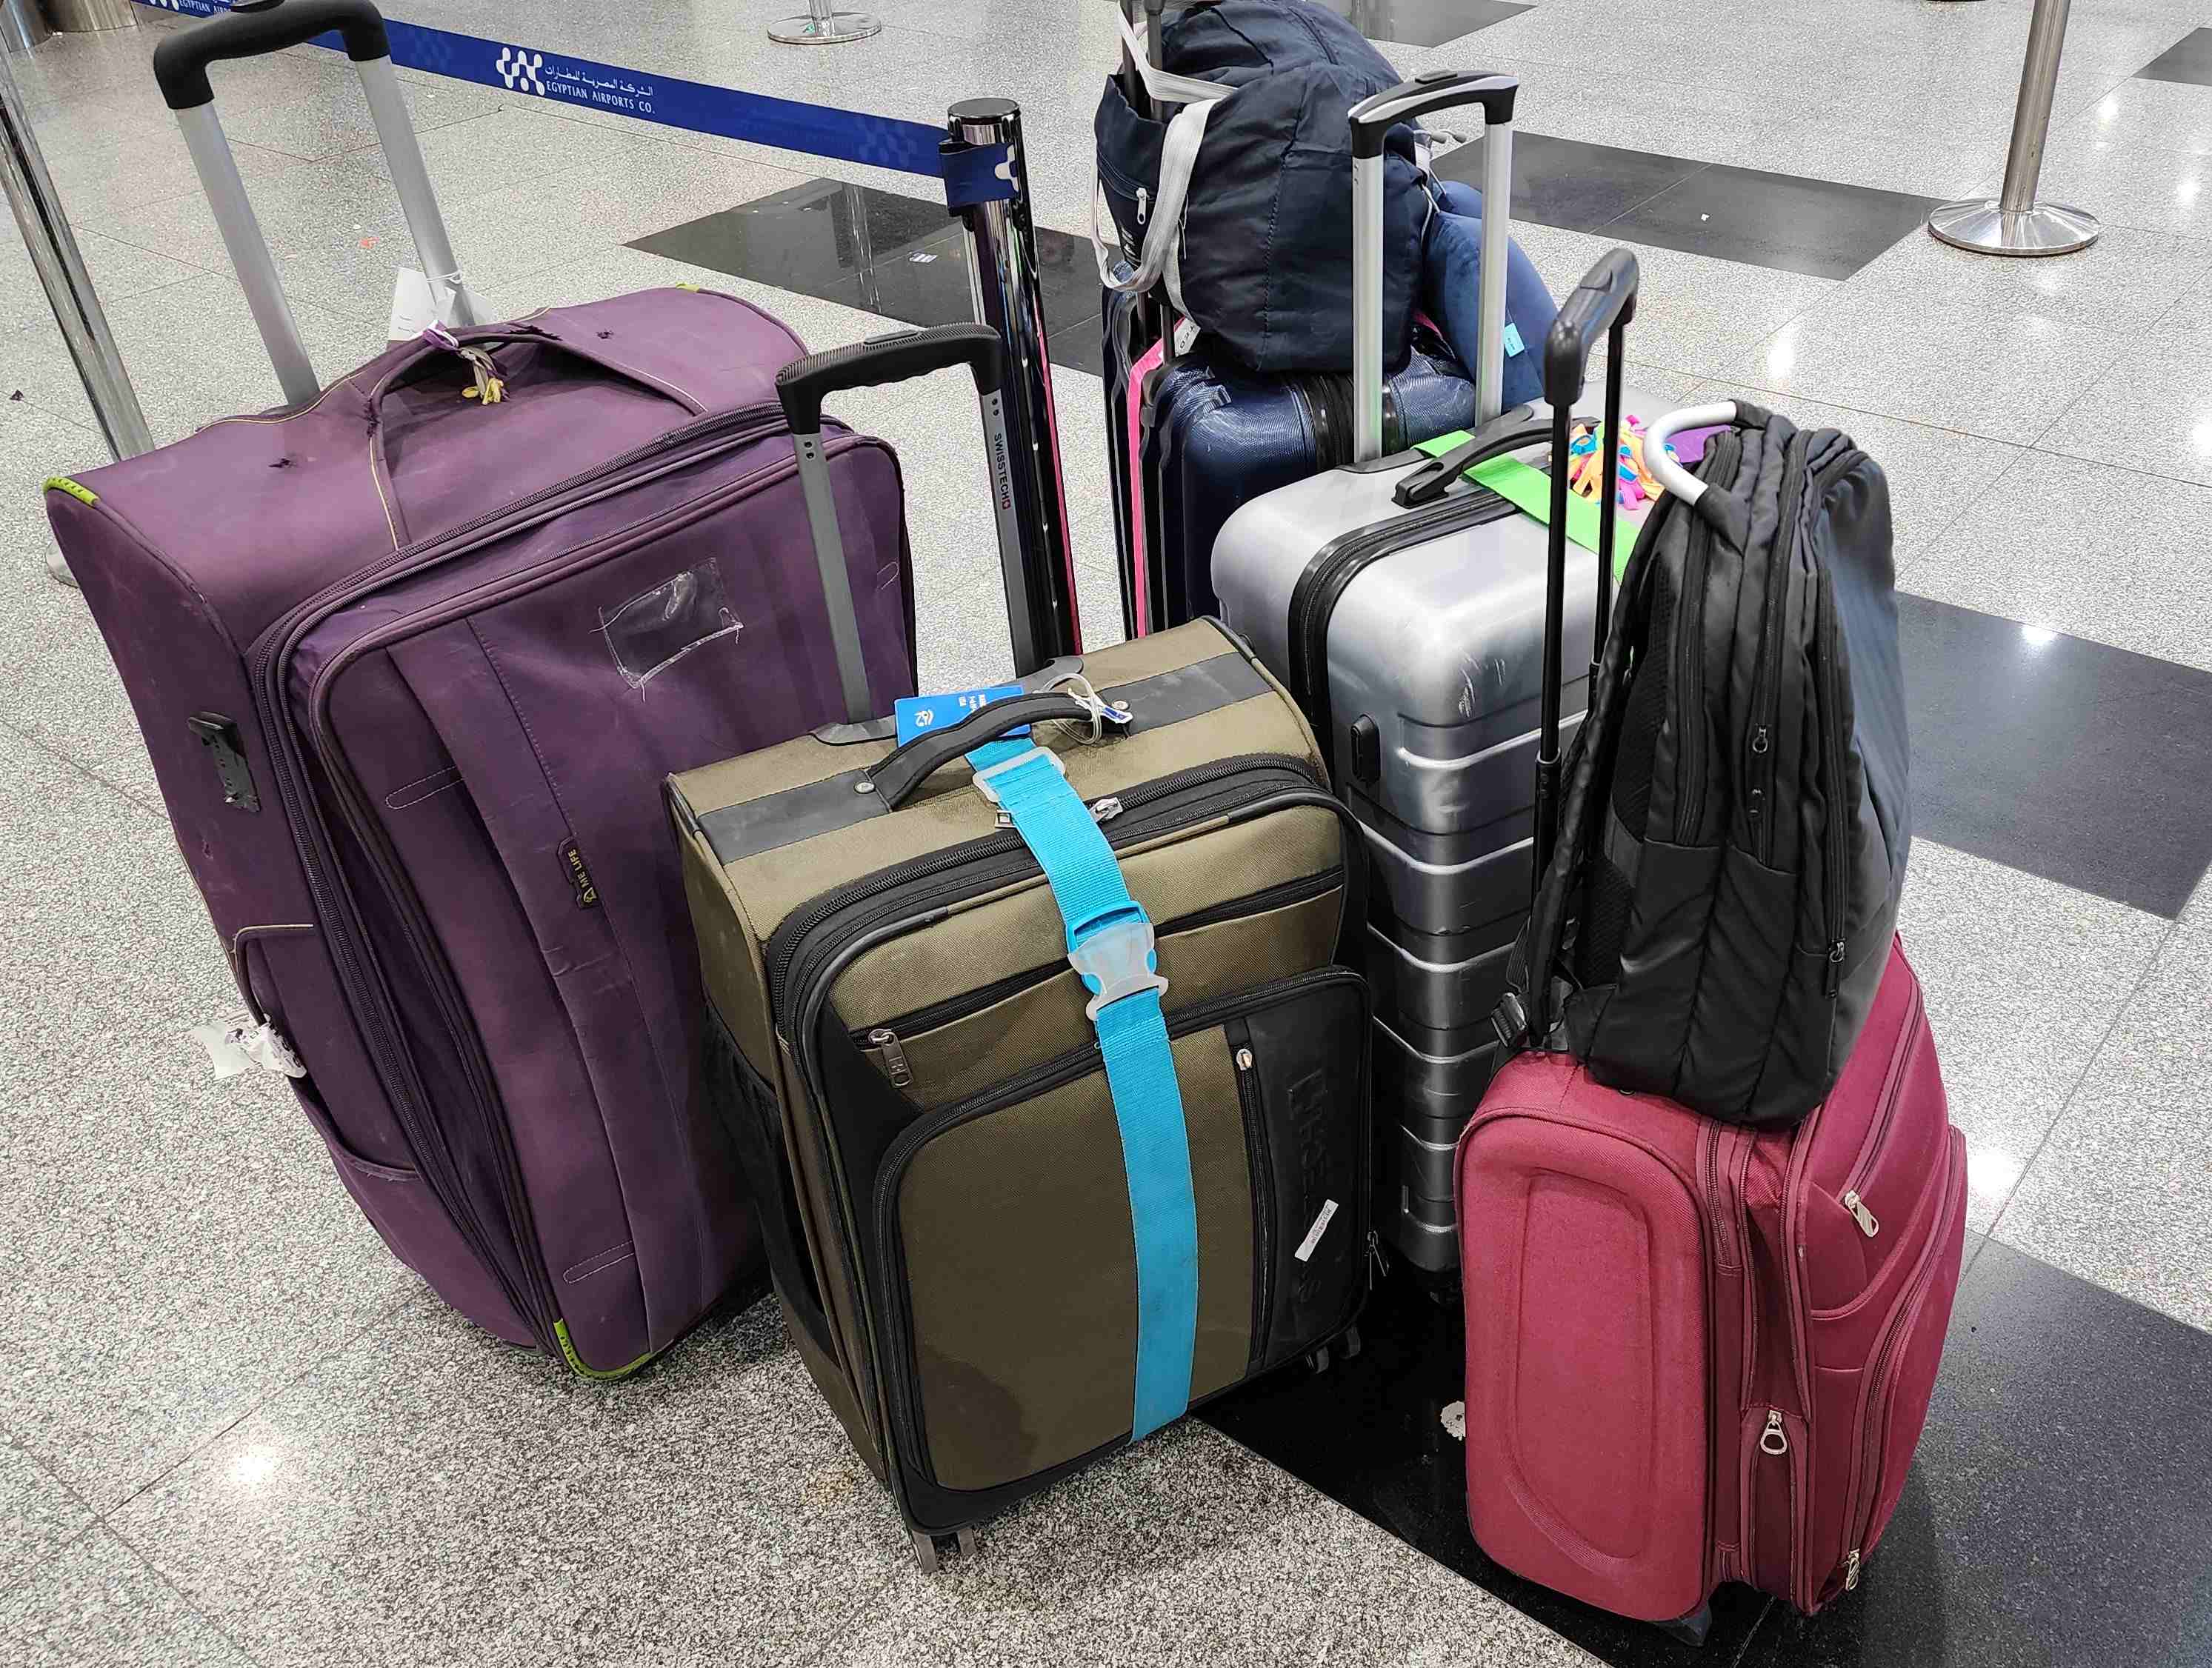 Pile of Luggage at an Airport.